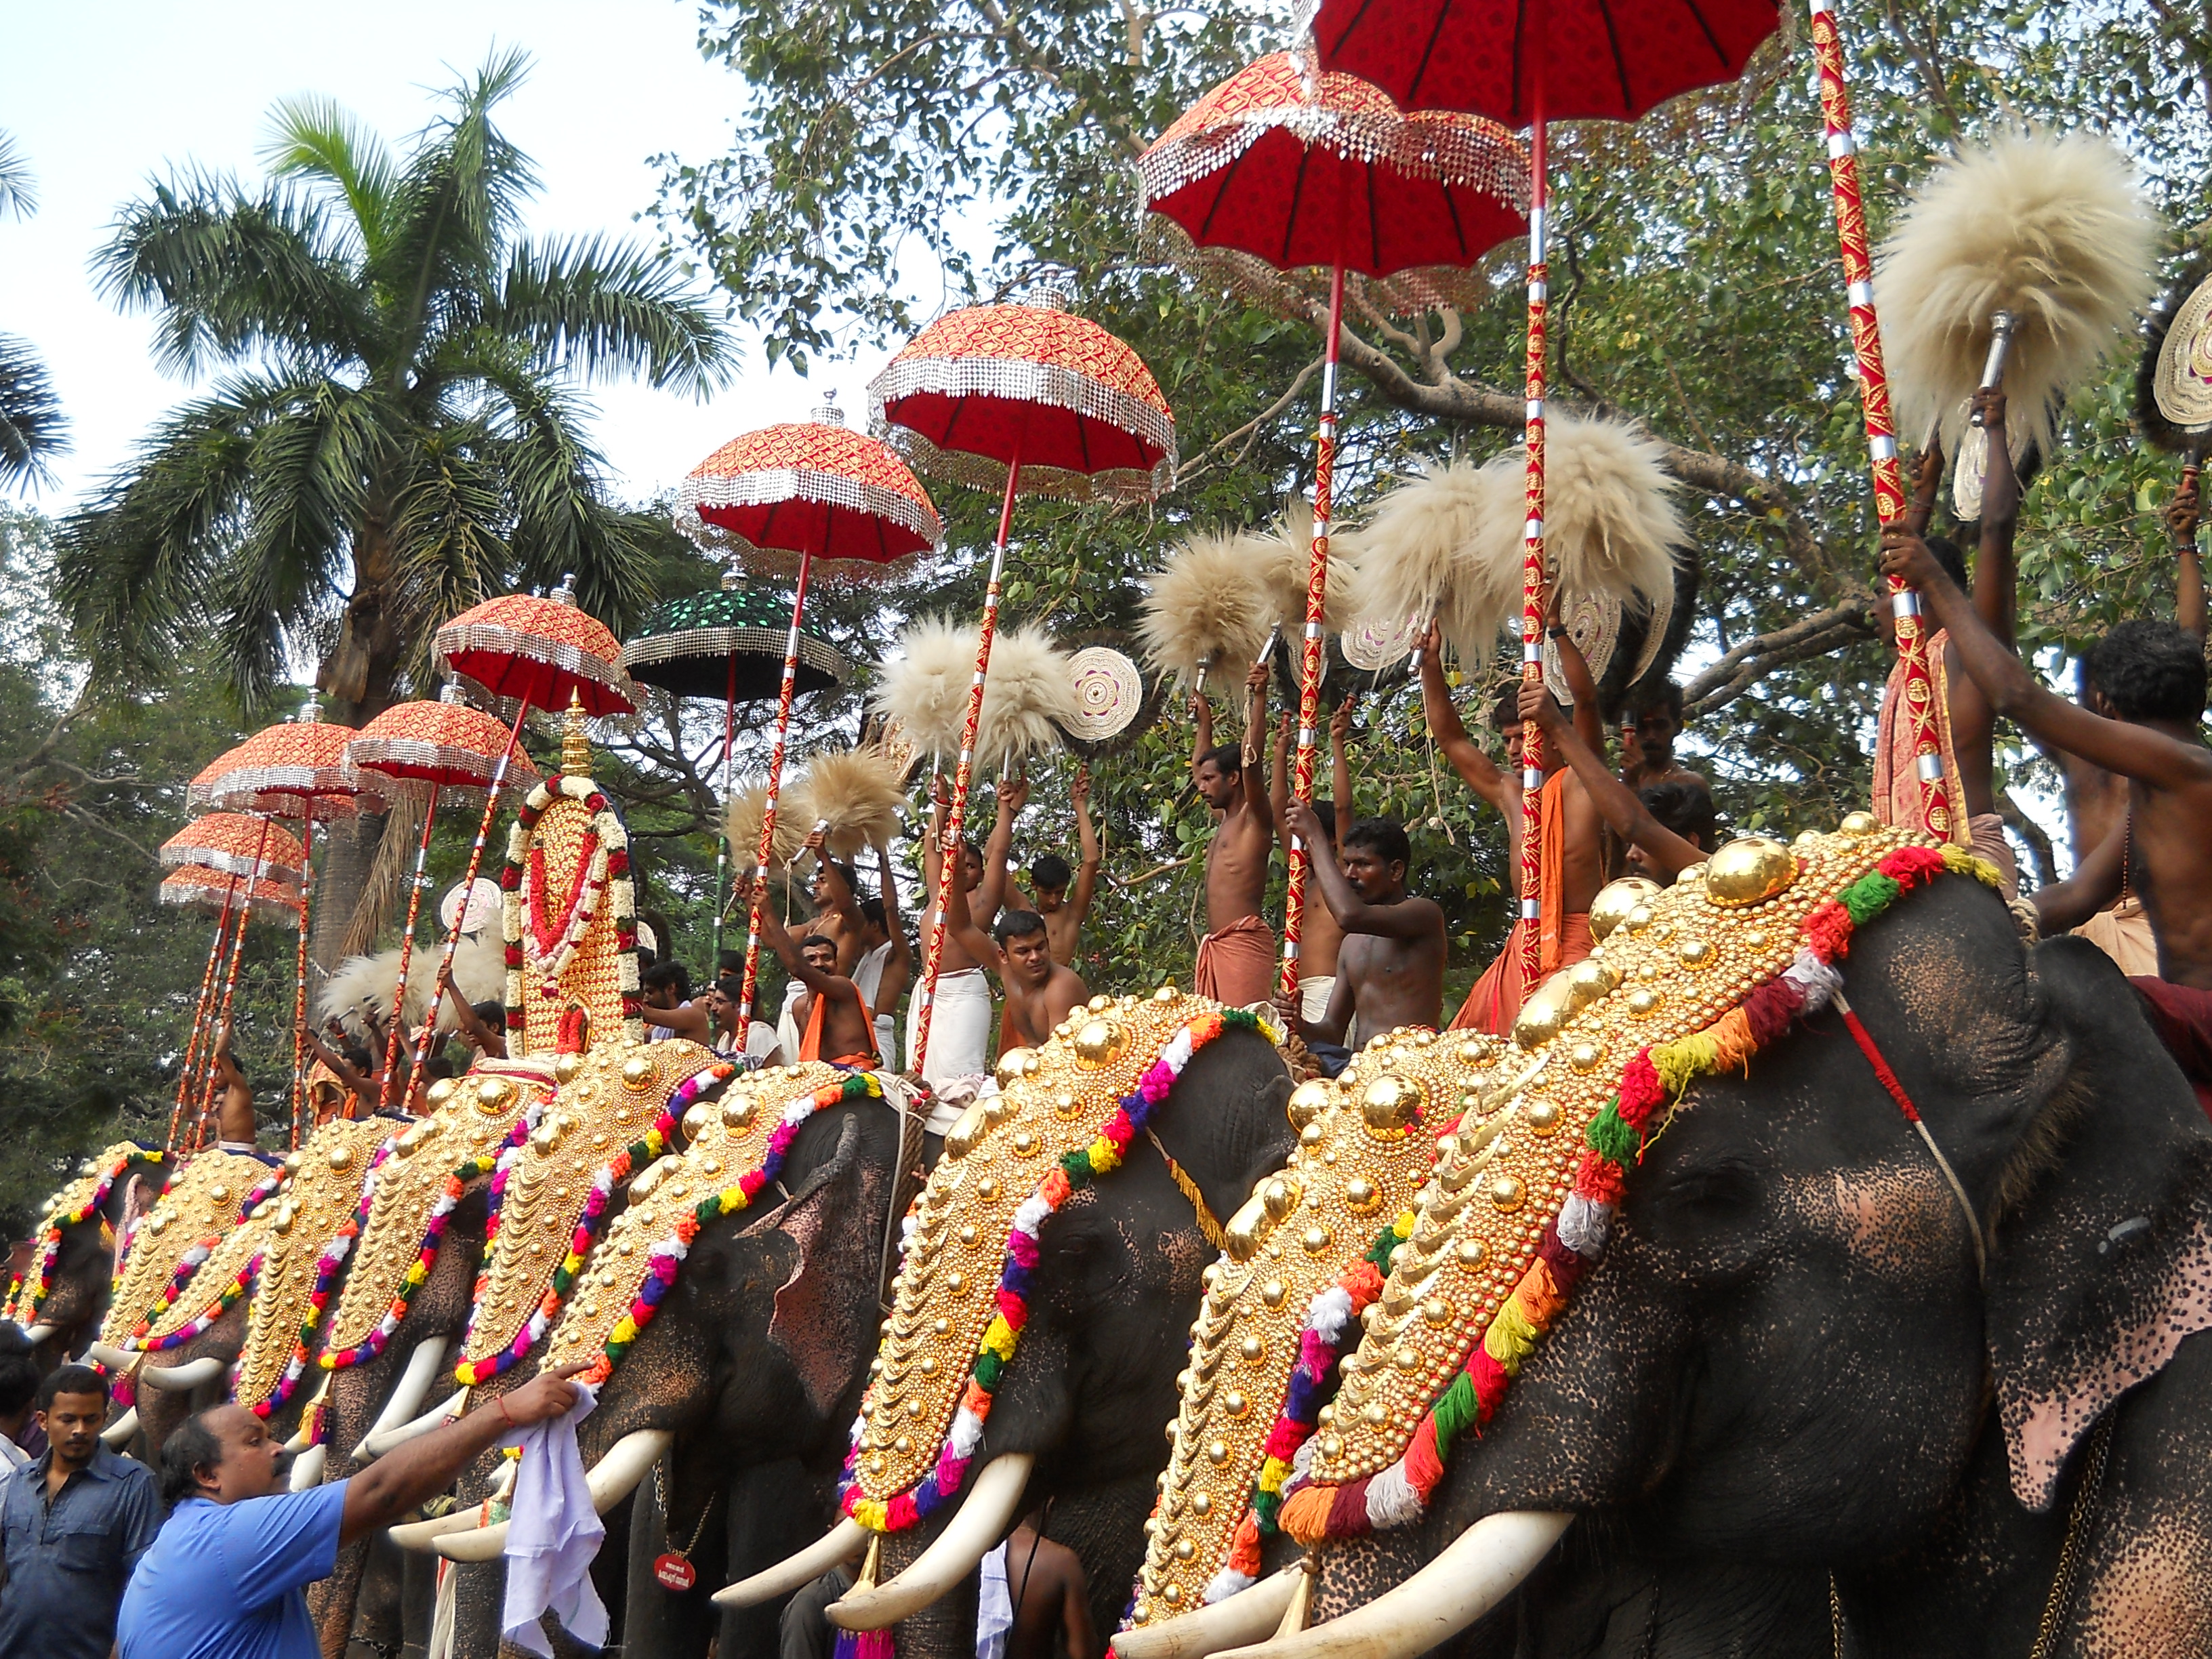 How Many Elephants Are There In Thrissur Pooram